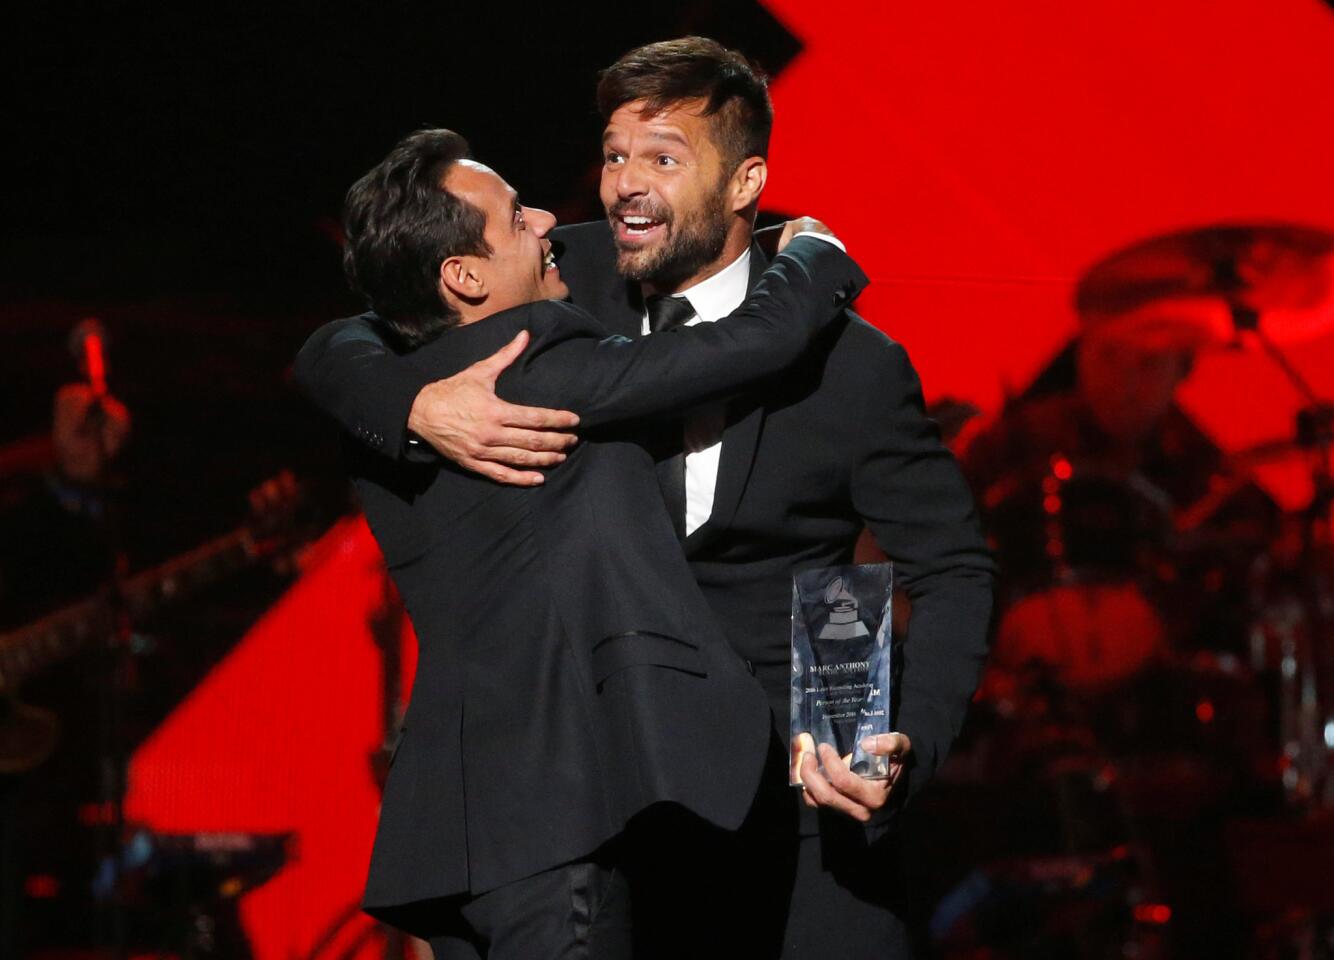 Singer Martin presents recording artist Anthony with the Latin Recording Academy Person of the Year award in Las Vegas